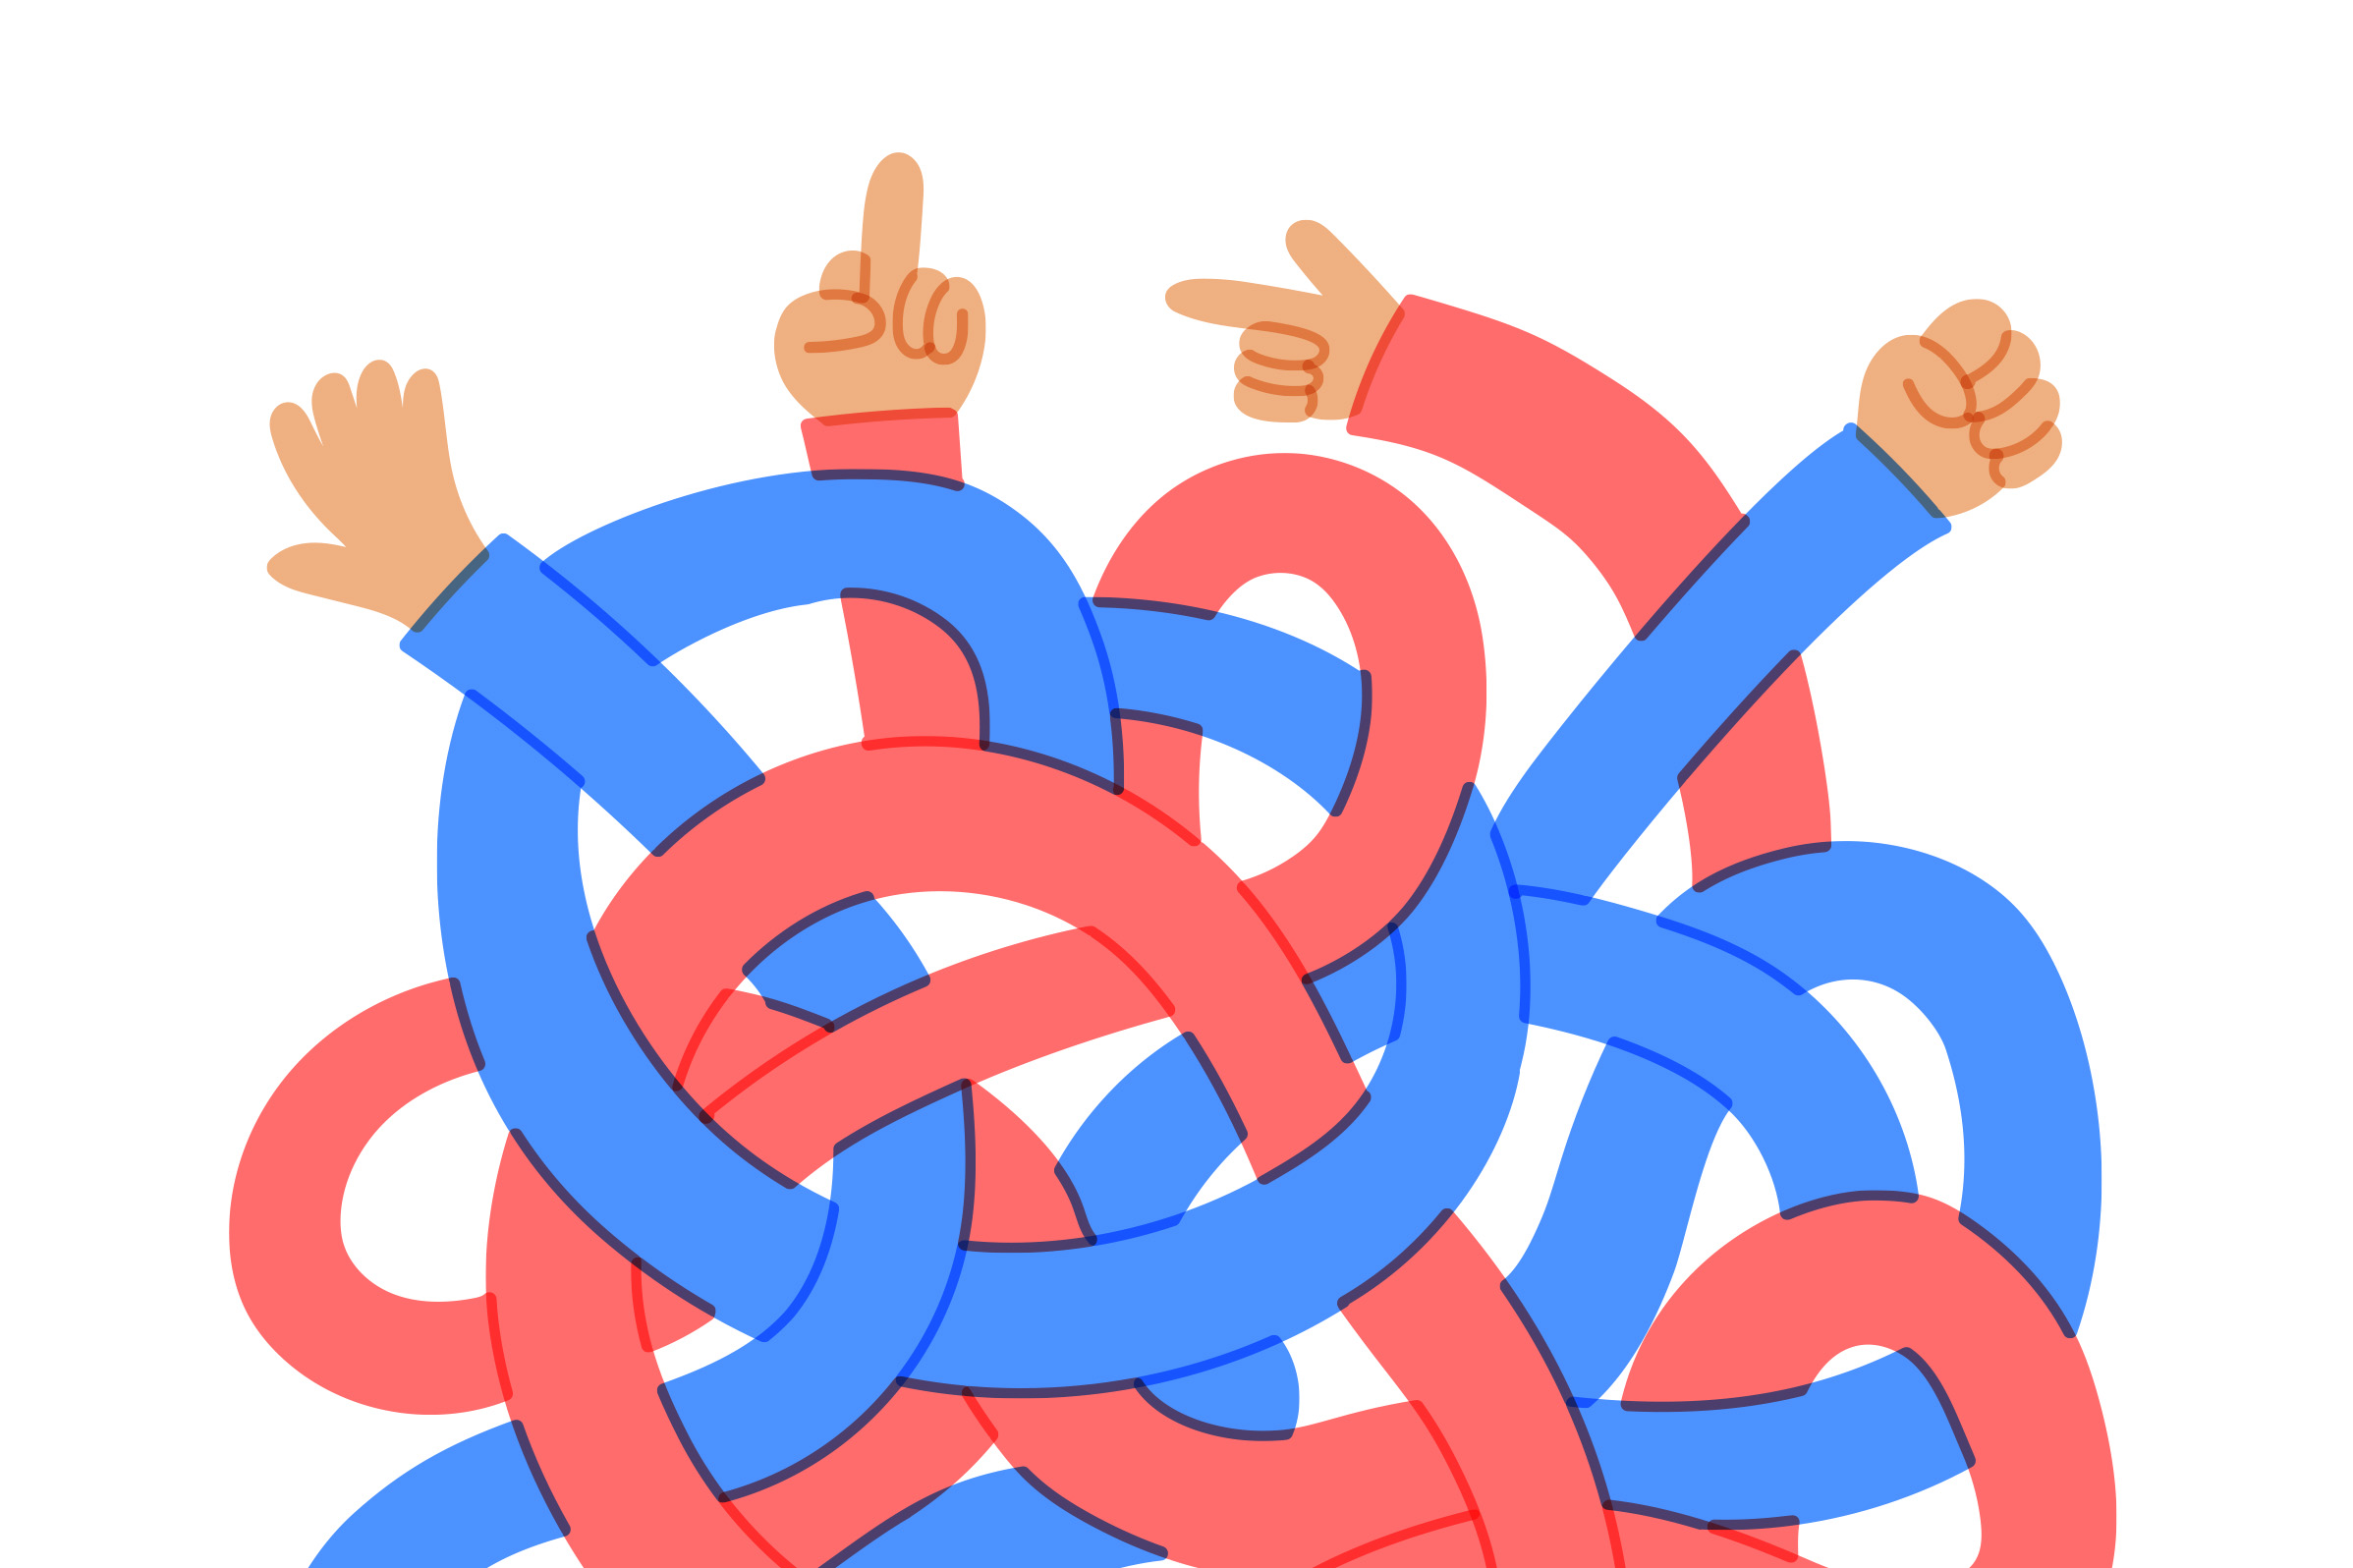 illustration of tangled limbs tussling cartoonishly. One, at center, raises up the middle finger as an obscene gesture.